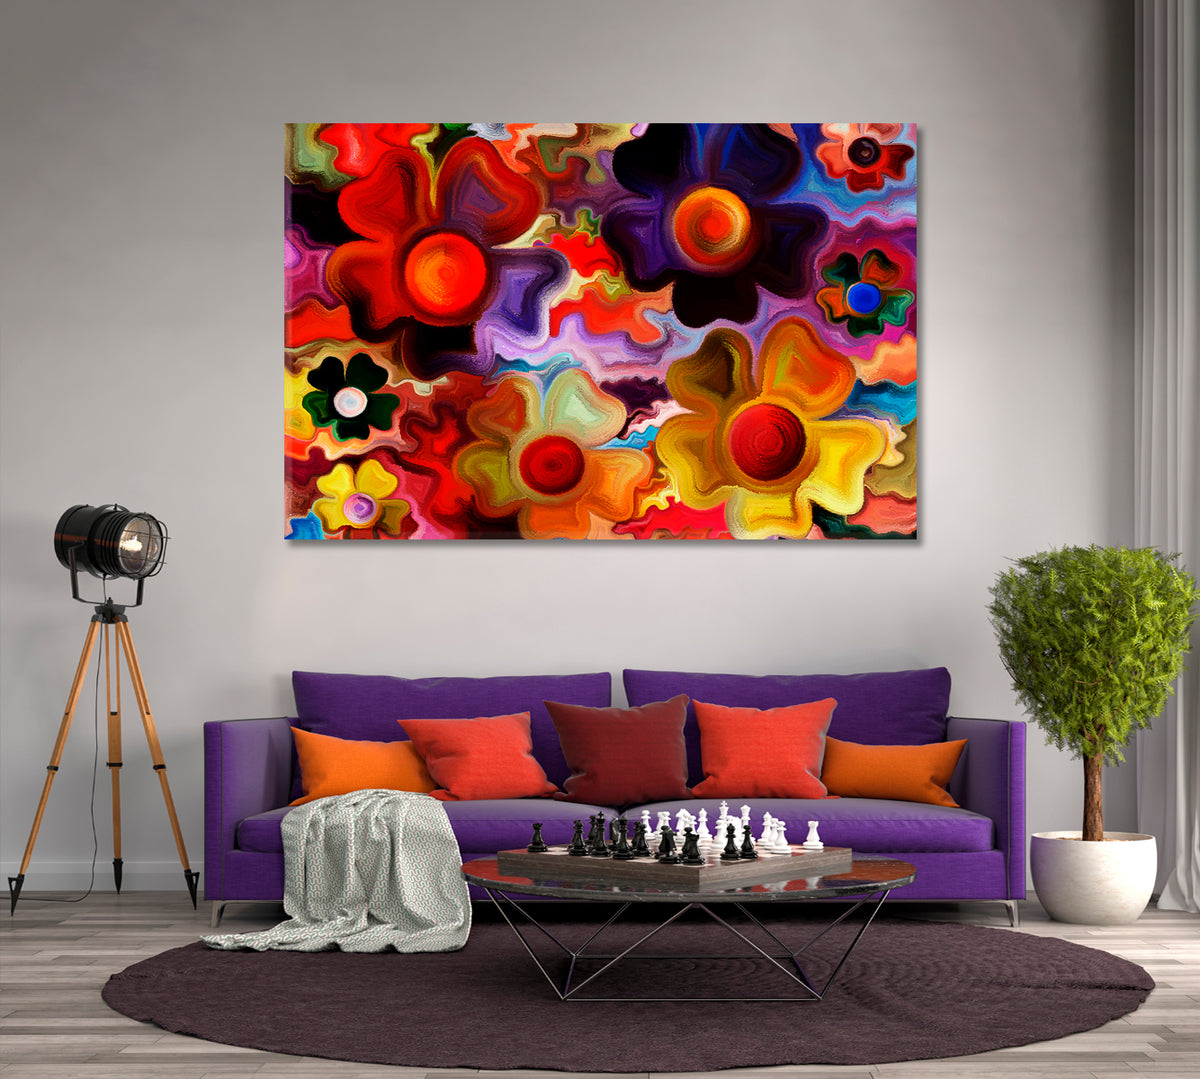 Vibrant Abstract Flowers And Shapes Floral & Botanical Split Art Artesty 1 panel 24" x 16" 